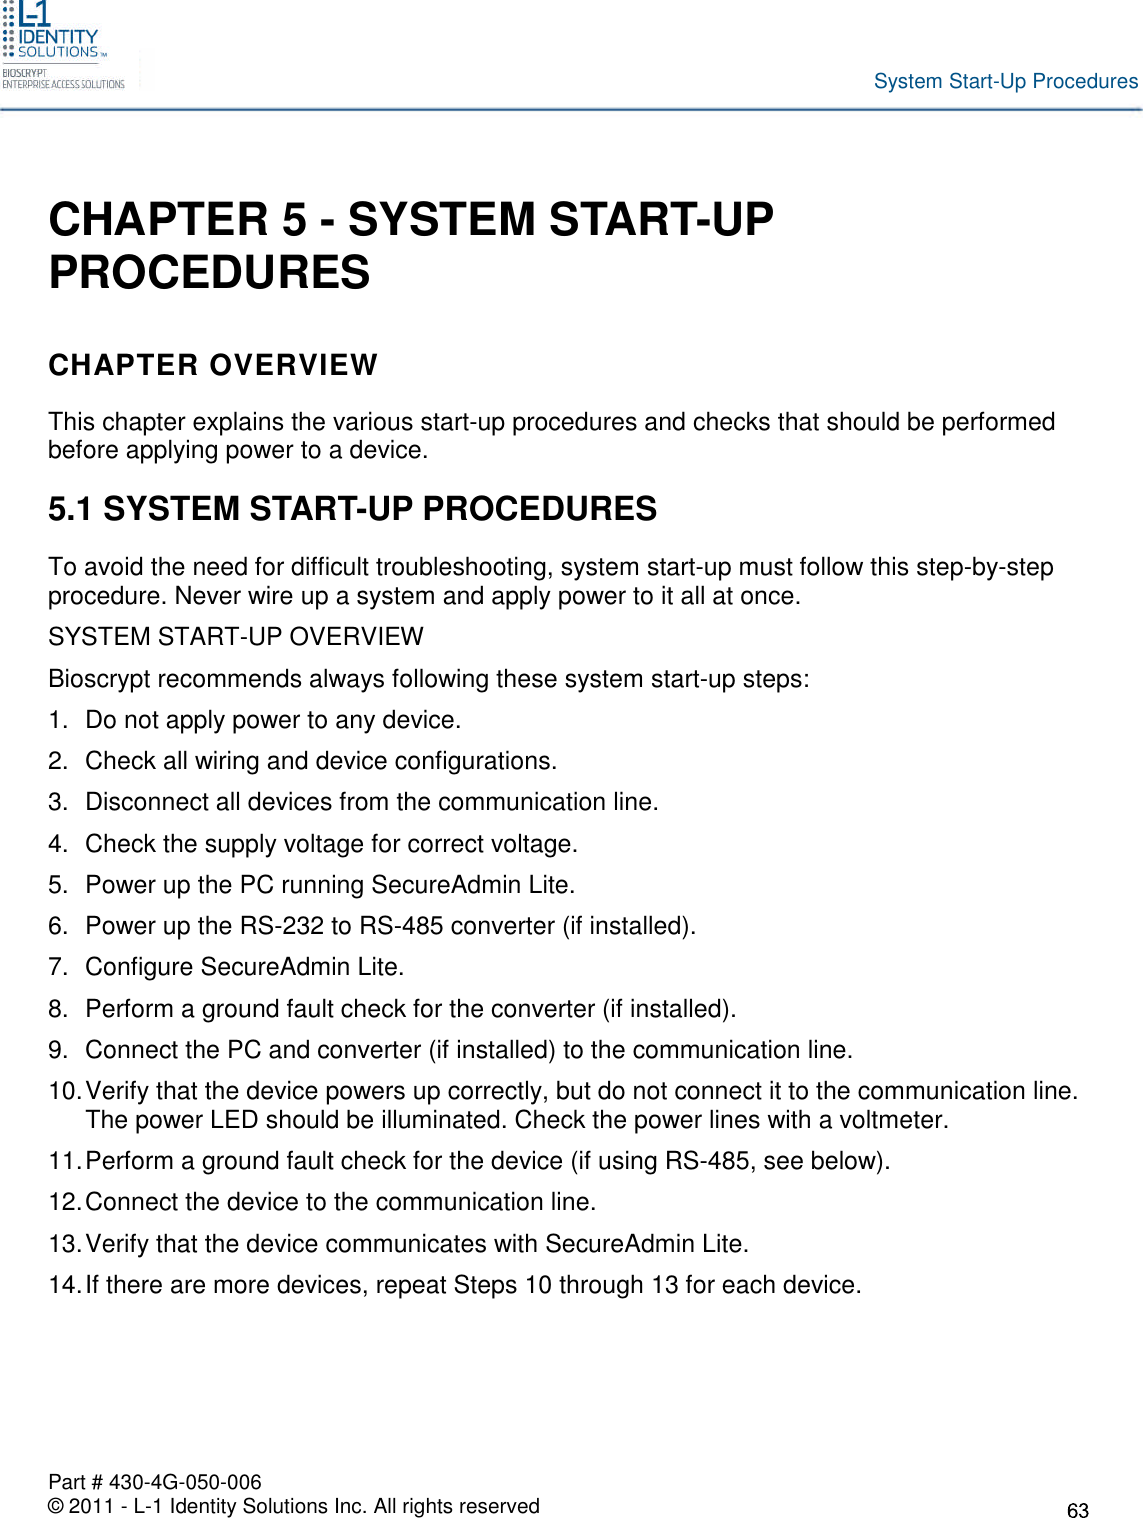 Part # 430-4G-050-006© 2011 - L-1 Identity Solutions Inc. All rights reservedSystem Start-Up ProceduresCHAPTER 5 - SYSTEM START-UPPROCEDURESCHAPTER OVERVIEWThis chapter explains the various start-up procedures and checks that should be performedbefore applying power to a device.5.1 SYSTEM START-UP PROCEDURESTo avoid the need for difficult troubleshooting, system start-up must follow this step-by-stepprocedure. Never wire up a system and apply power to it all at once.SYSTEM START-UP OVERVIEWBioscrypt recommends always following these system start-up steps:1. Do not apply power to any device.2. Check all wiring and device configurations.3. Disconnect all devices from the communication line.4. Check the supply voltage for correct voltage.5. Power up the PC running SecureAdmin Lite.6. Power up the RS-232 to RS-485 converter (if installed).7. Configure SecureAdmin Lite.8. Perform a ground fault check for the converter (if installed).9. Connect the PC and converter (if installed) to the communication line.10.Verify that the device powers up correctly, but do not connect it to the communication line.The power LED should be illuminated. Check the power lines with a voltmeter.11.Perform a ground fault check for the device (if using RS-485, see below).12.Connect the device to the communication line.13.Verify that the device communicates with SecureAdmin Lite.14.If there are more devices, repeat Steps 10 through 13 for each device.